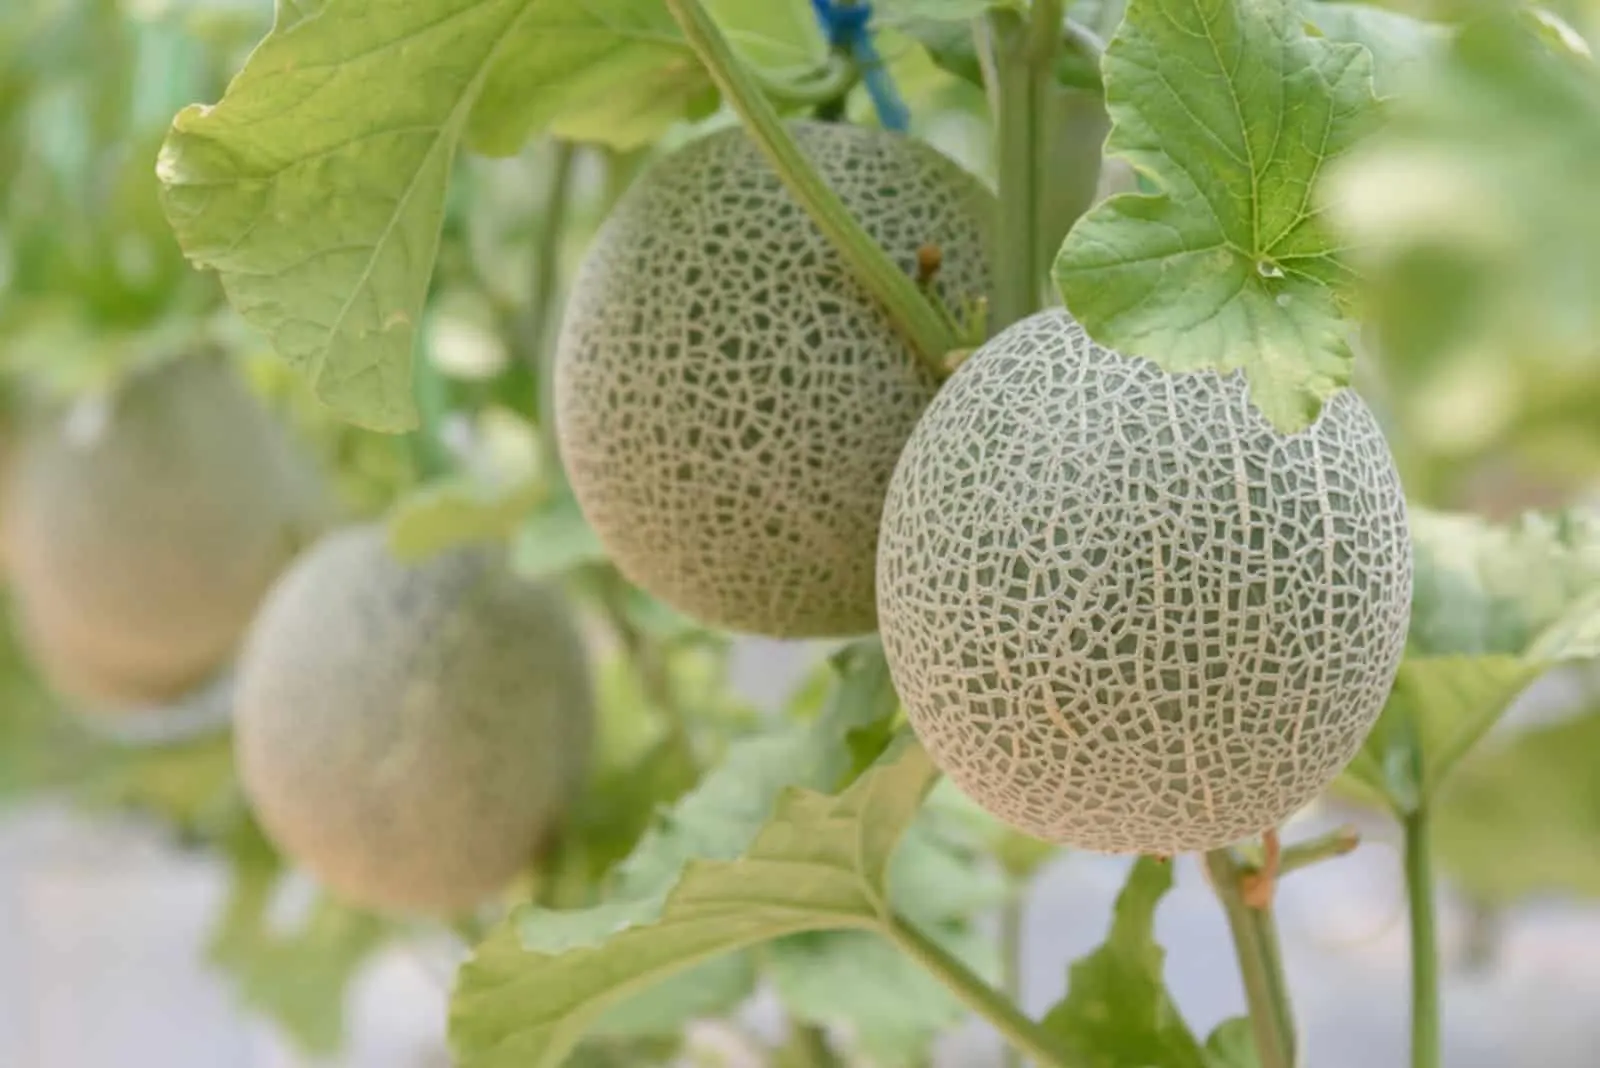 cantaloupe melons plants growing in greenhouse